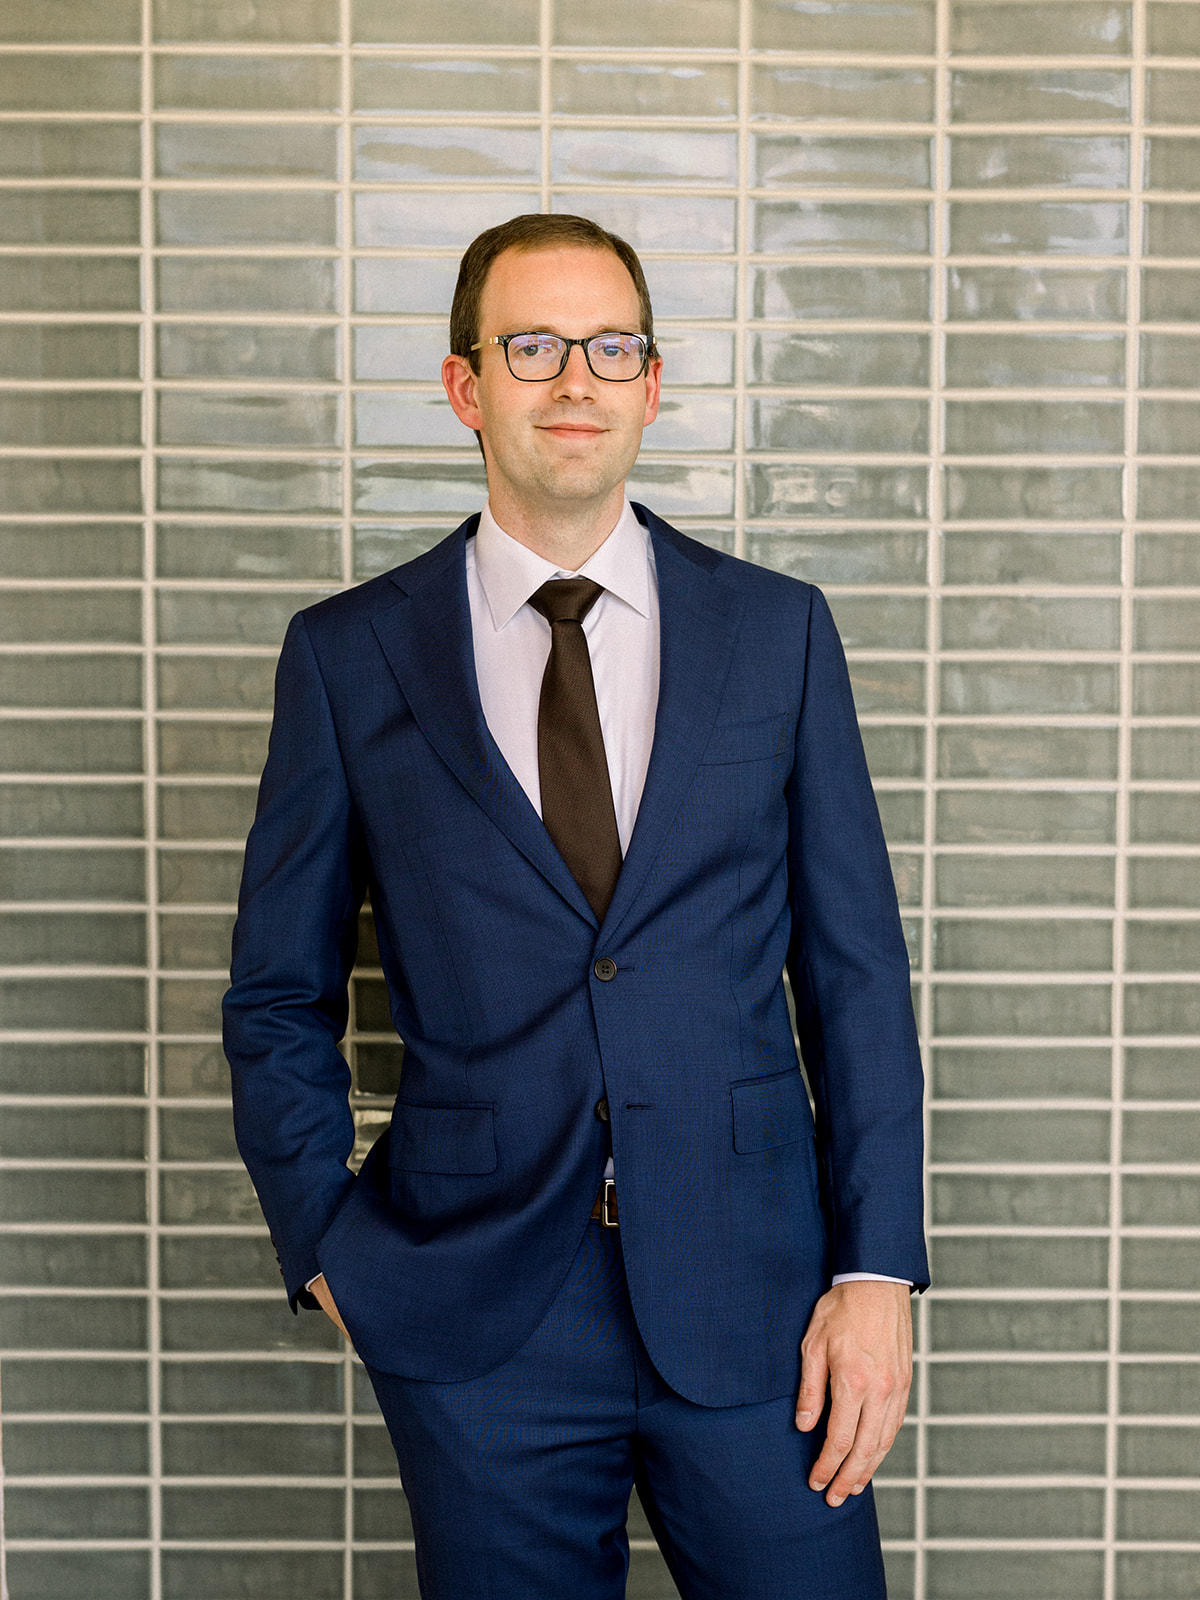 groom wearing glasses with navy suit and black tie